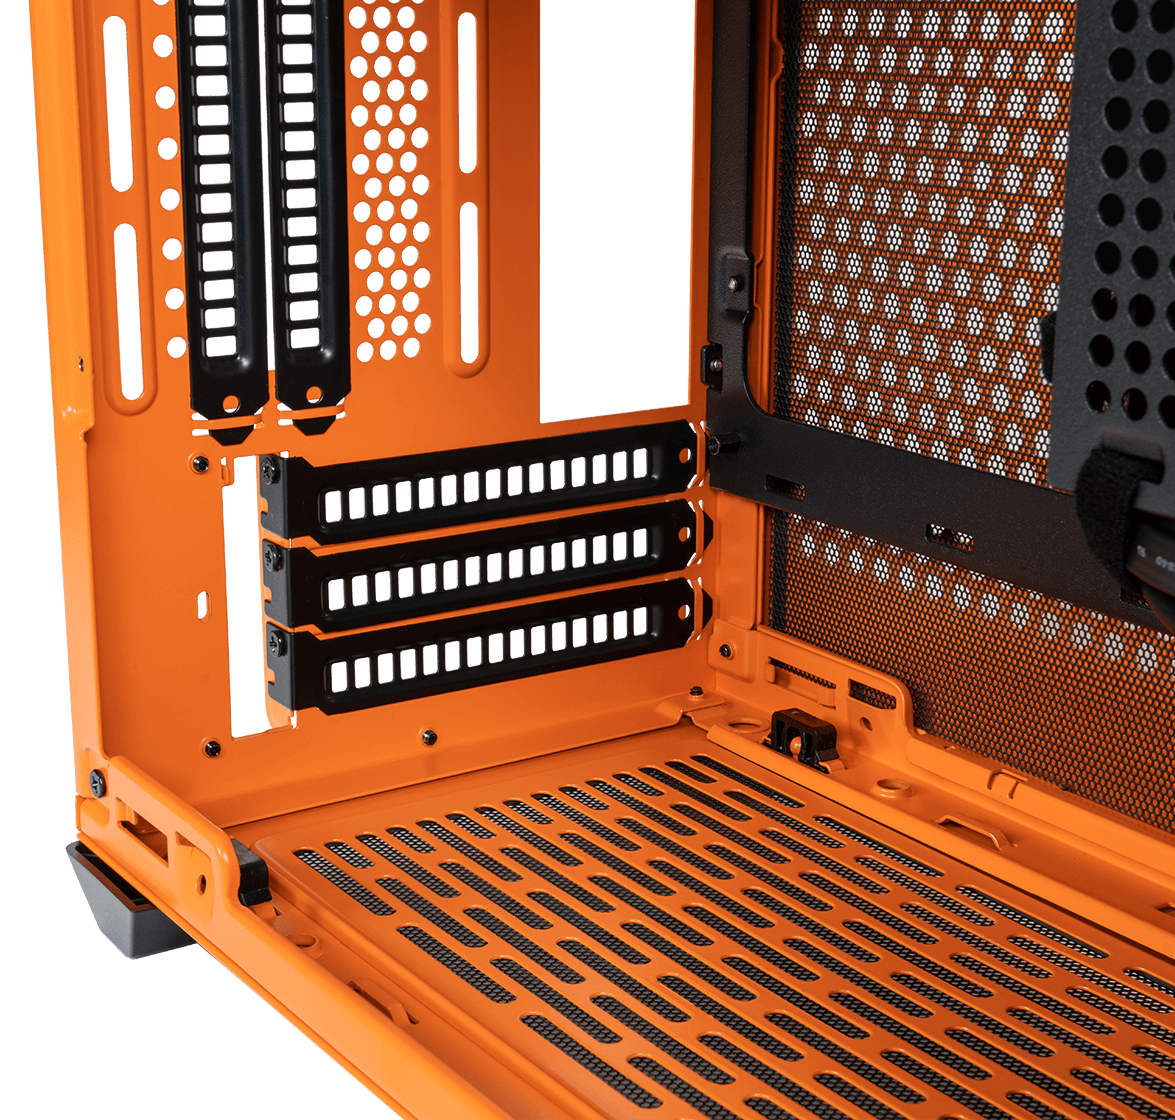 Triple-Slot GPU Support and Included Vertical Riser Cable